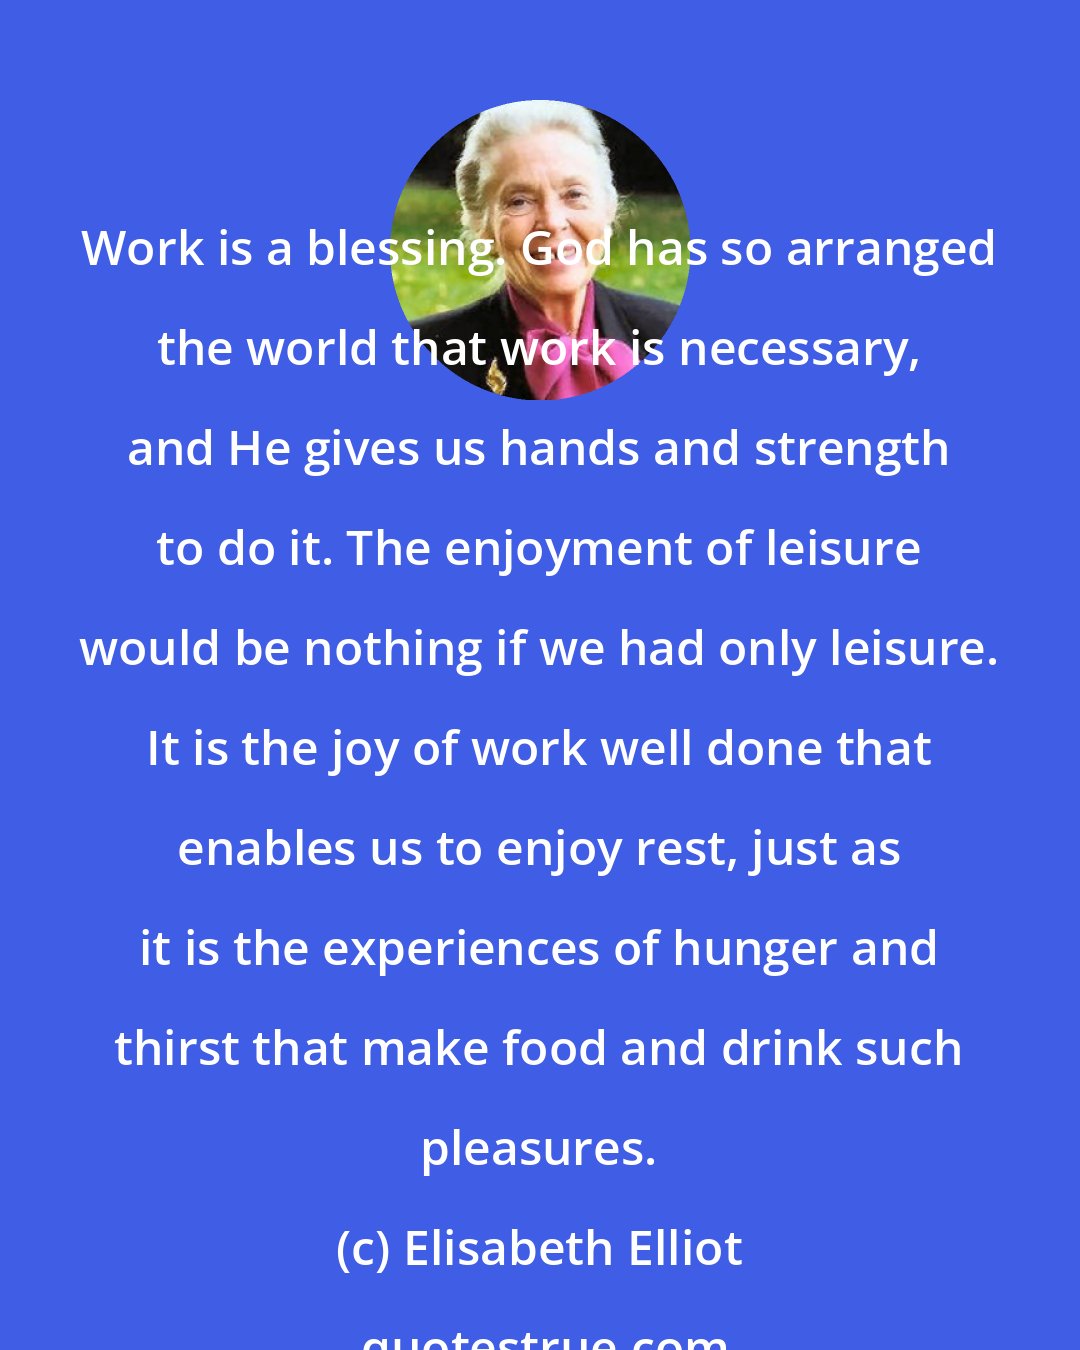 Elisabeth Elliot: Work is a blessing. God has so arranged the world that work is necessary, and He gives us hands and strength to do it. The enjoyment of leisure would be nothing if we had only leisure. It is the joy of work well done that enables us to enjoy rest, just as it is the experiences of hunger and thirst that make food and drink such pleasures.